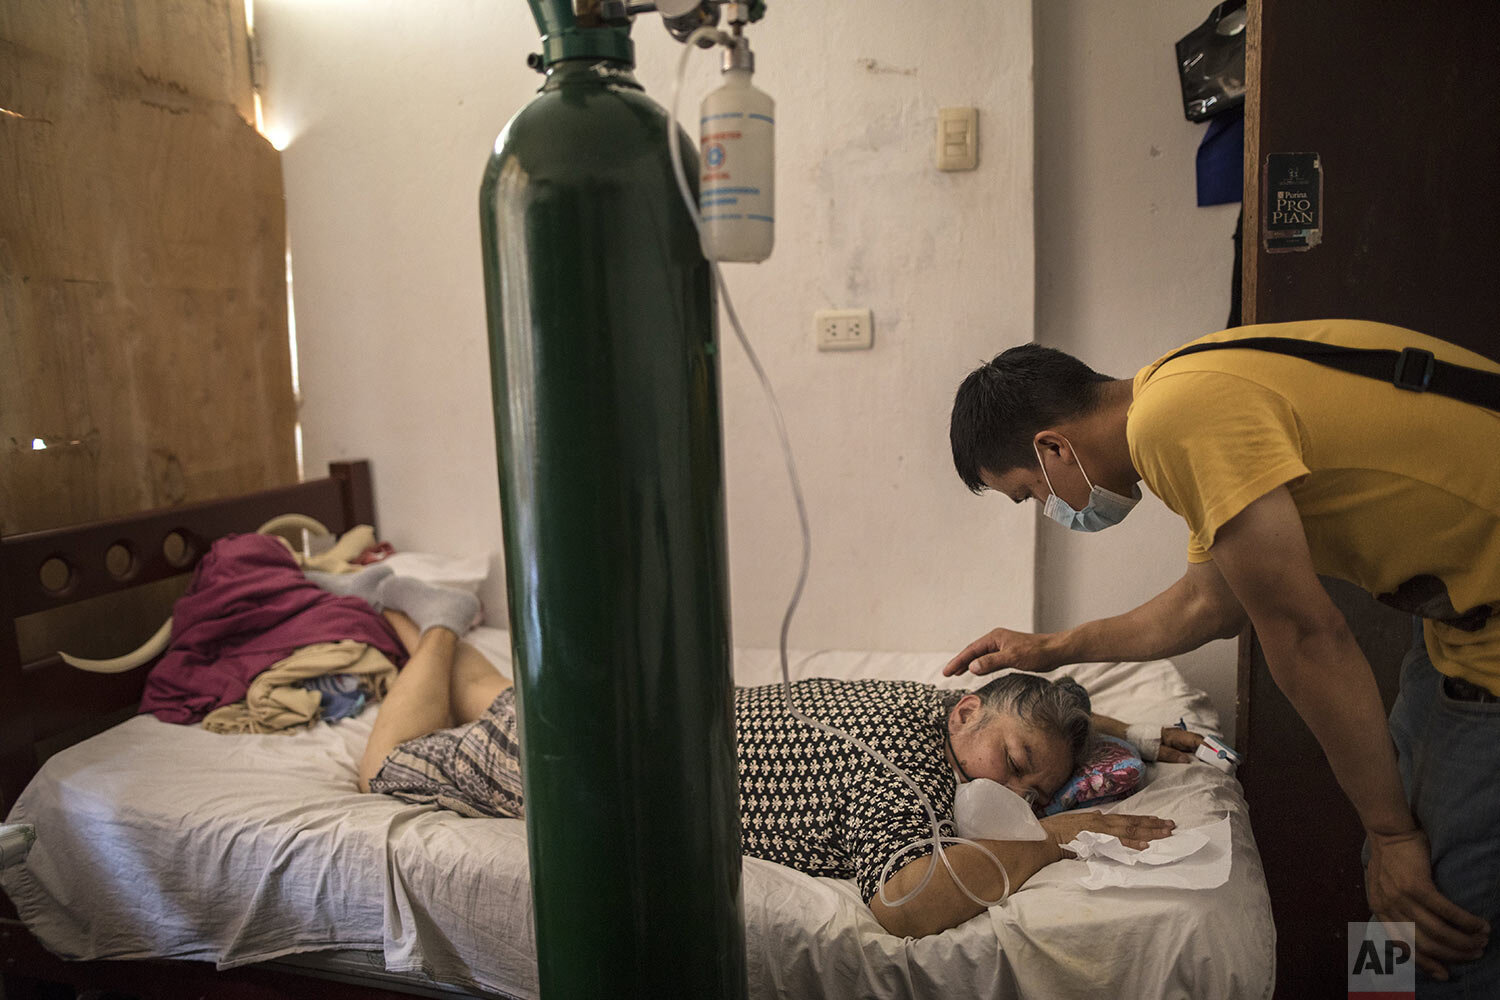  Elena Ruiz, 53, breathes in oxygen as part of her recovery treatment for COVID-19 as her son Antony watches over her in Lima, Peru, Jan. 29, 2021. (AP Photo/Rodrigo Abd) 